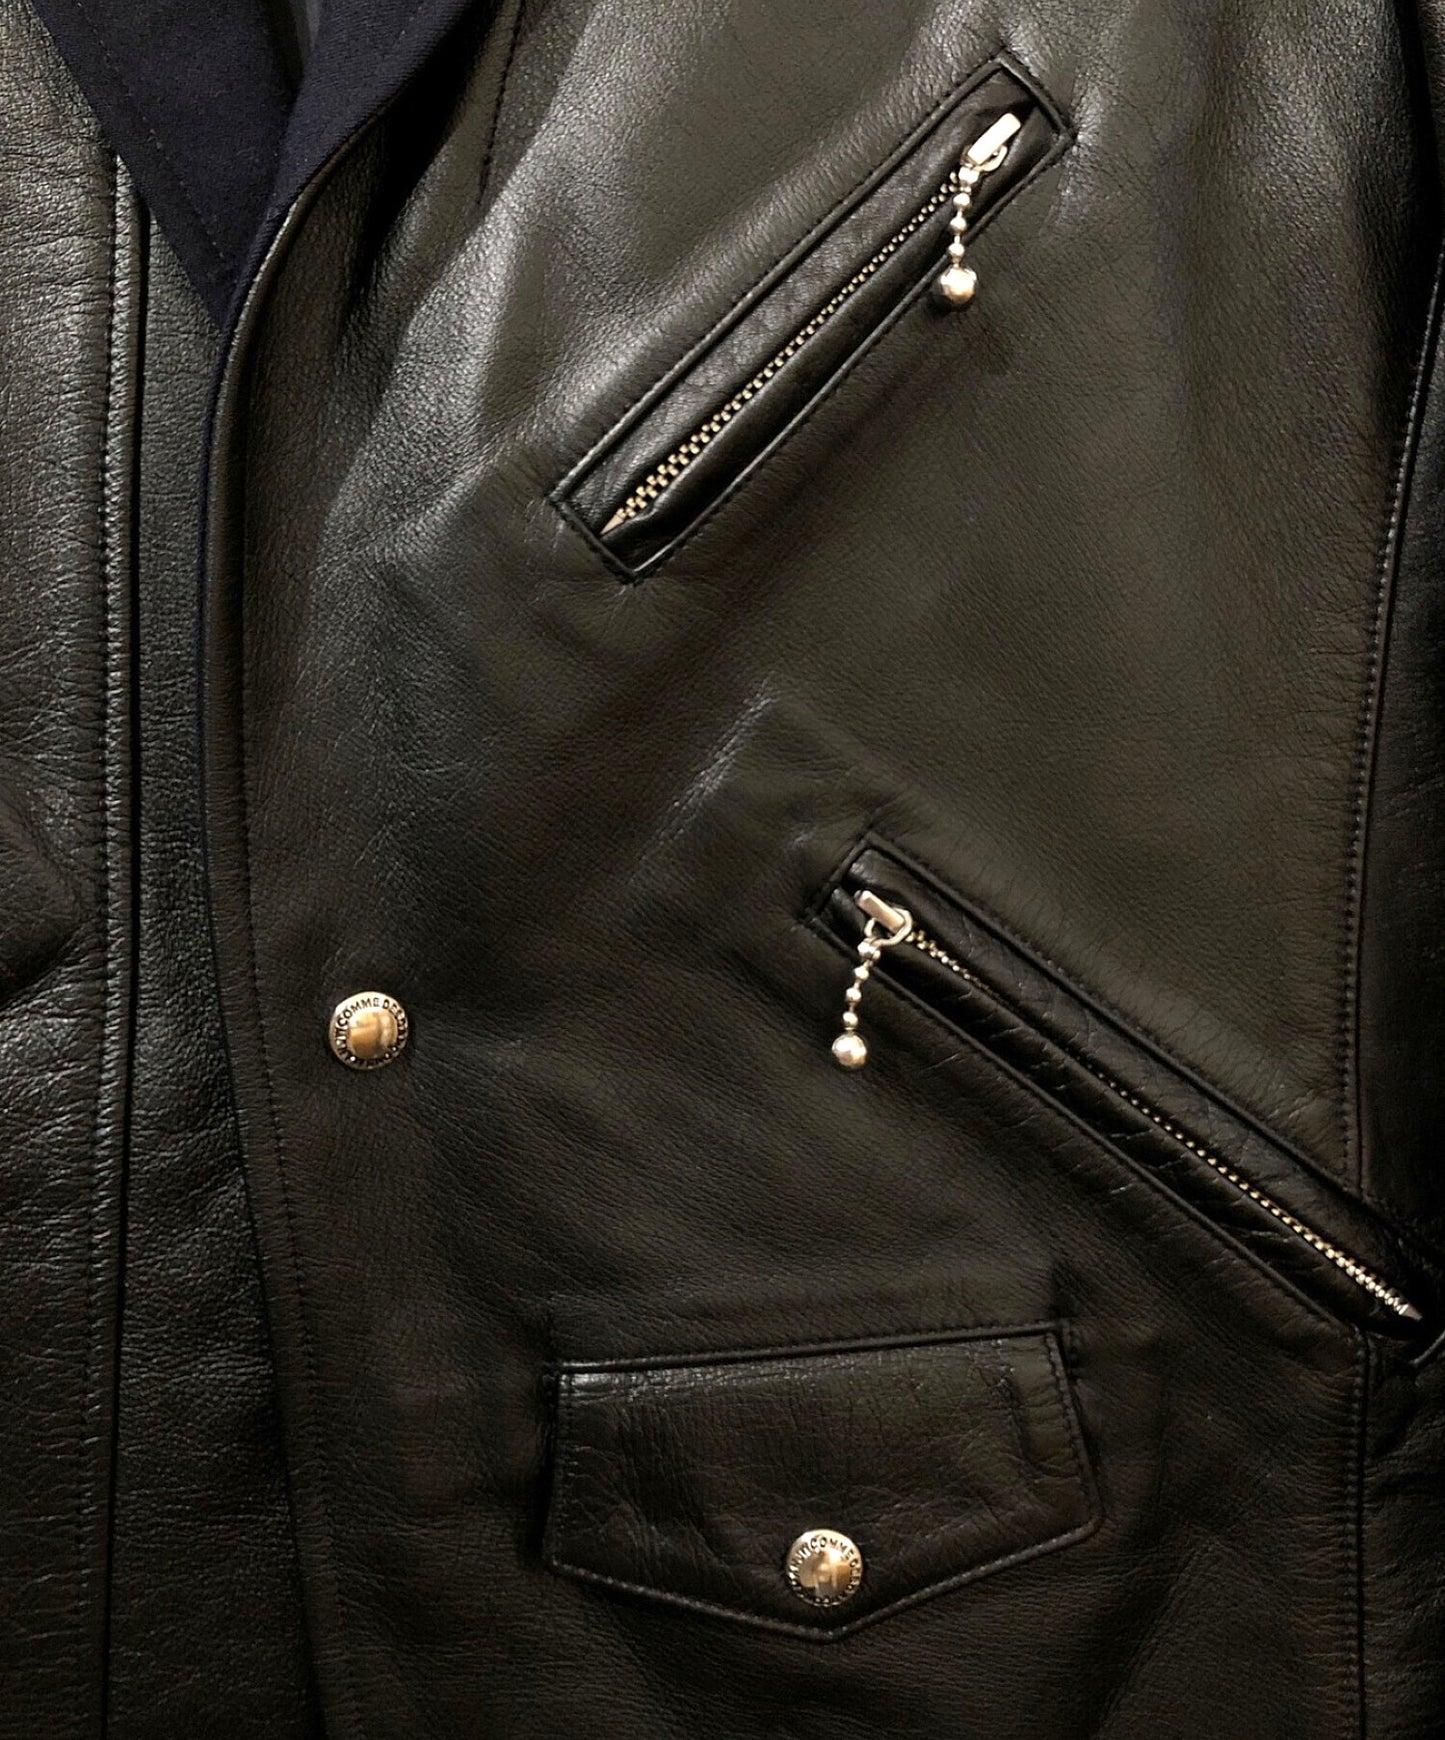 [Pre-owned] Brooks Brothers x COMME des GARCONS JUNYA WATANABE MAN Tailored Jacket with Leather Switching